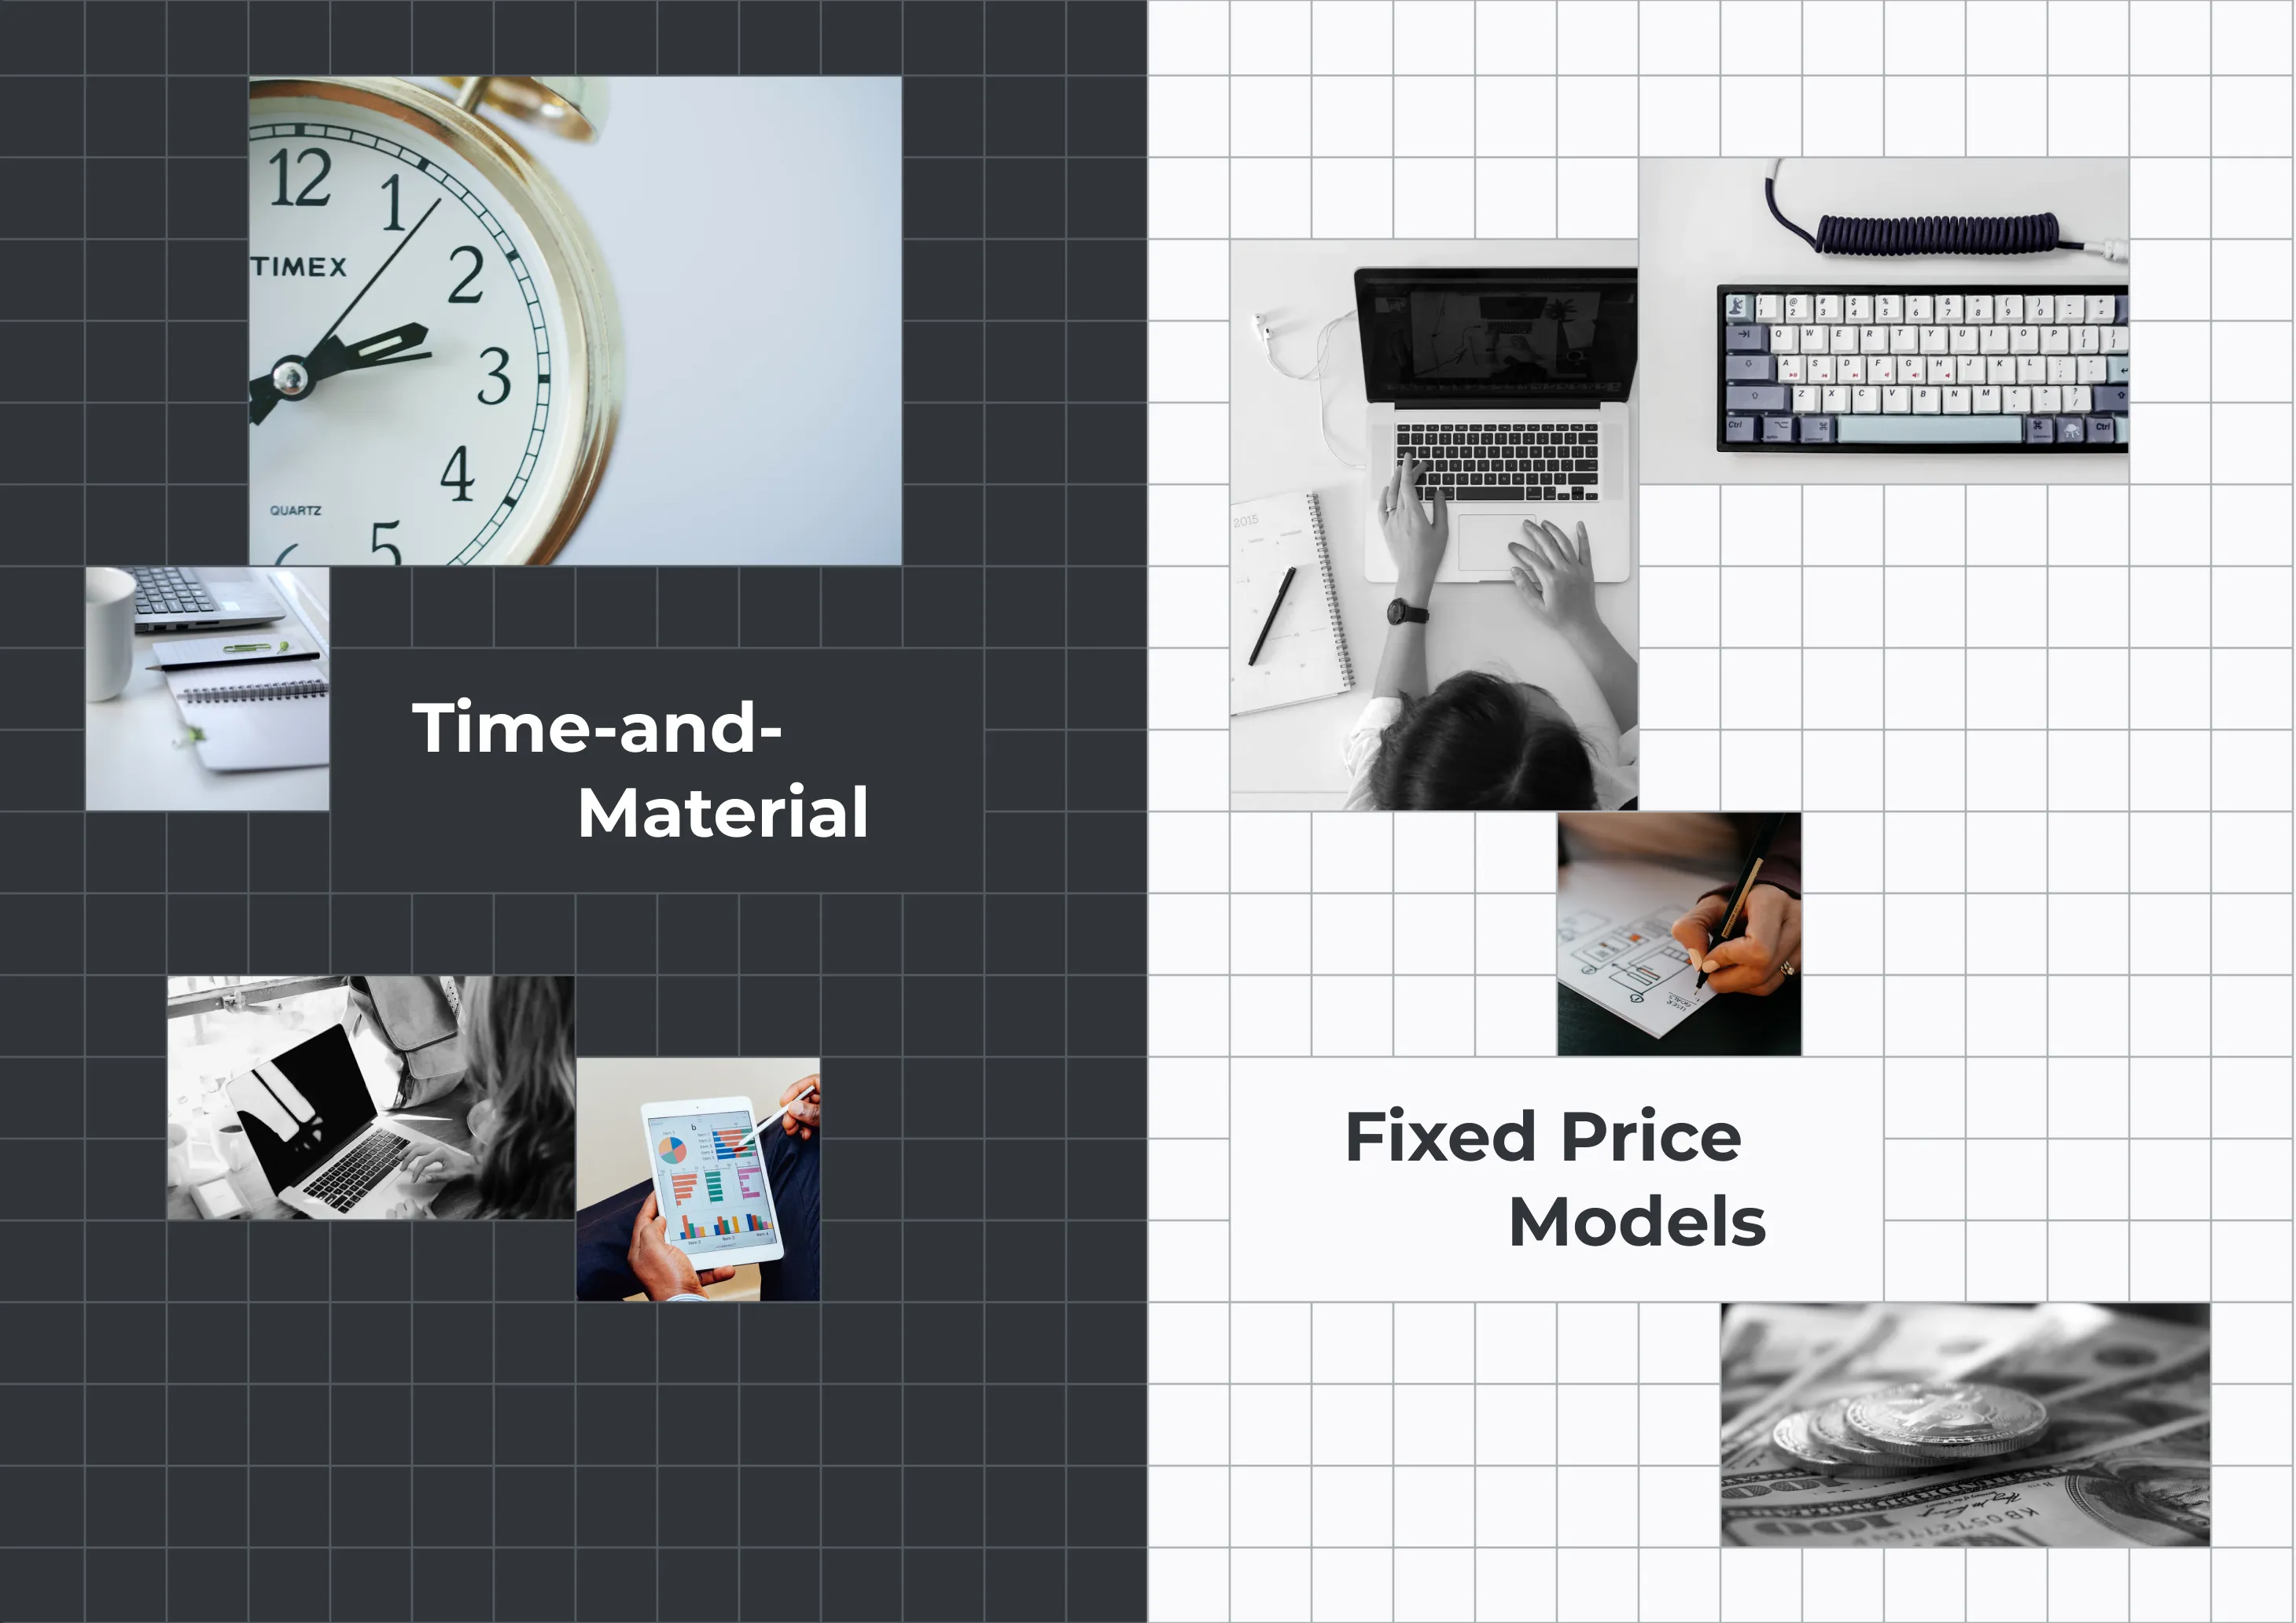 A Few Words about Time-and-Material vs Fixed Price Models